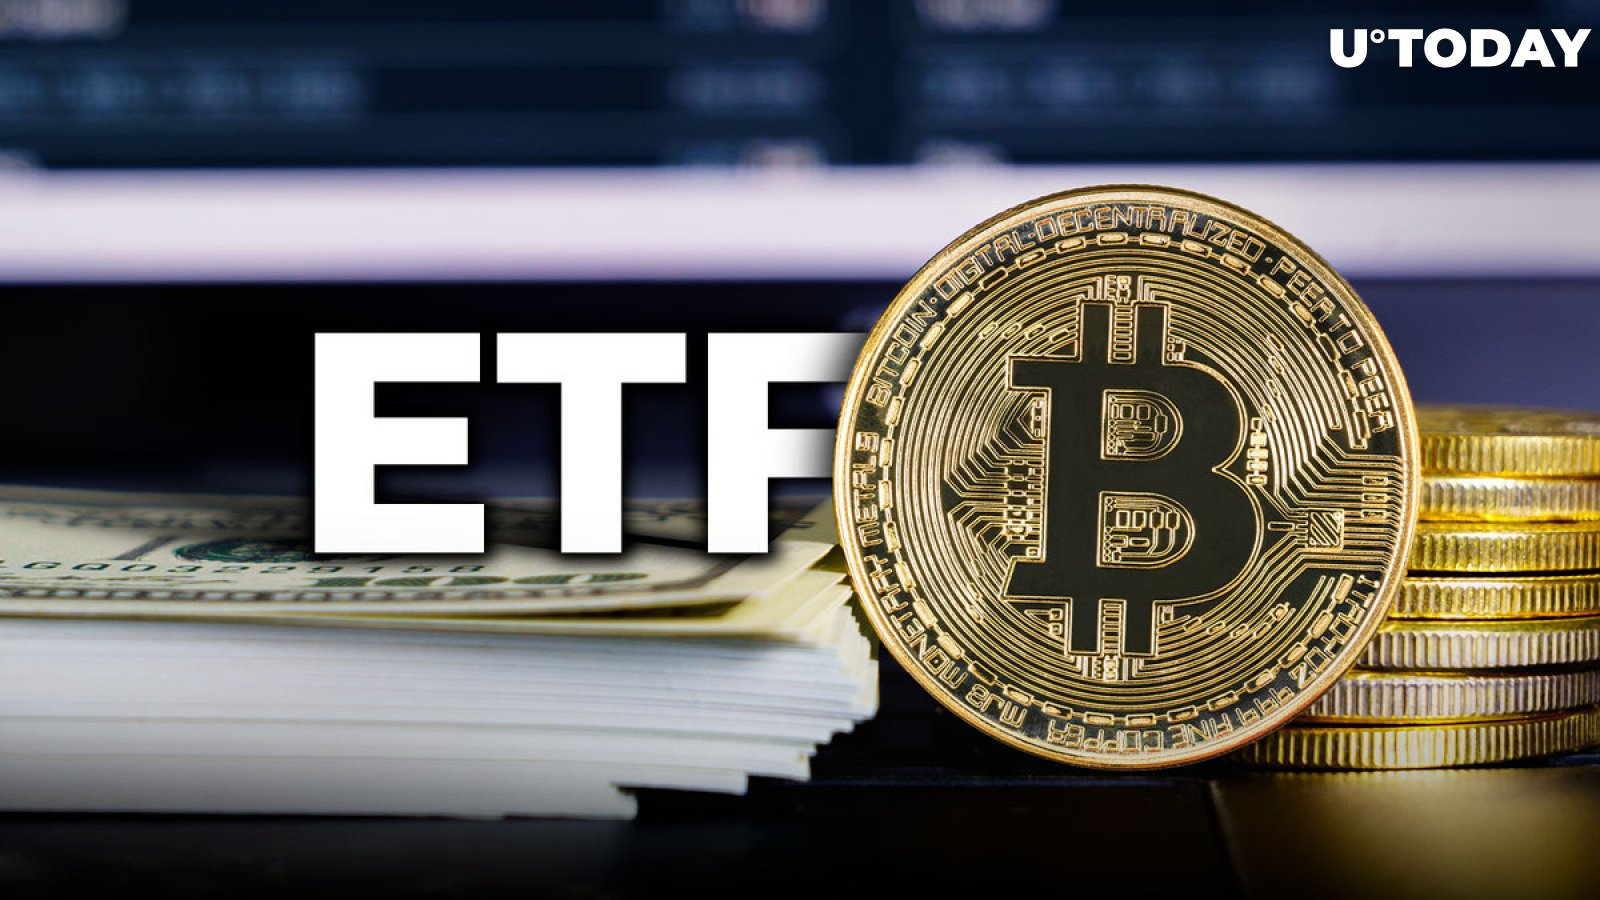 Several Bitcoin ETFs Bleed Funds as BTC Price Flirts With All-Time High